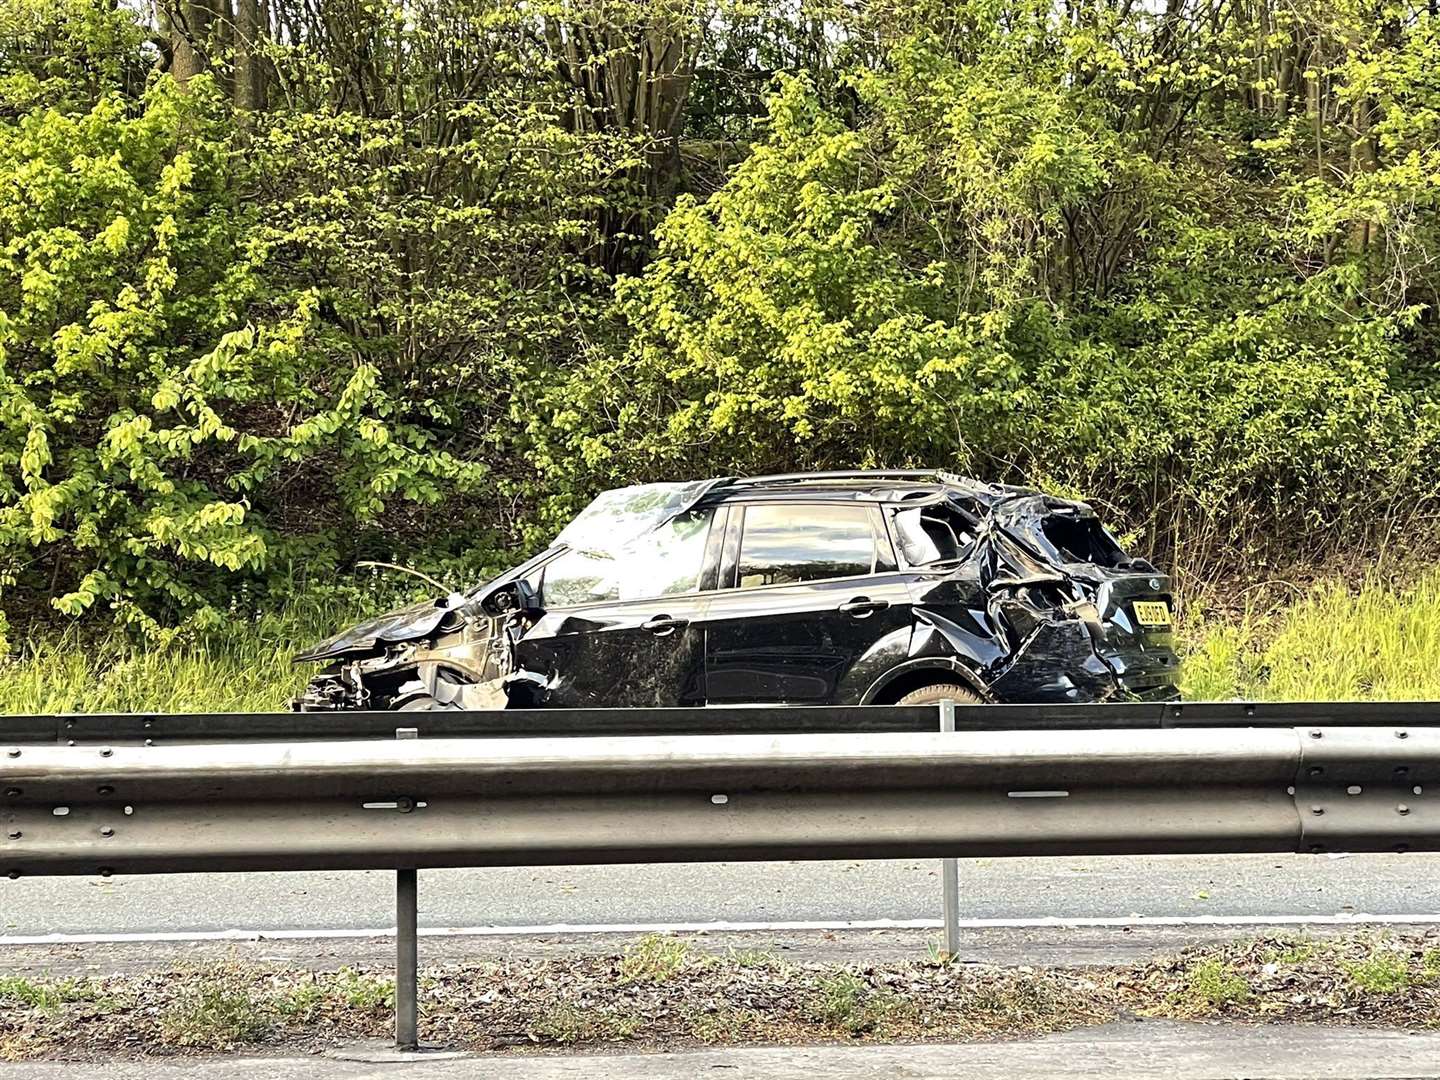 The wrecked car involved in the crash. Picture UKNIP (46978201)